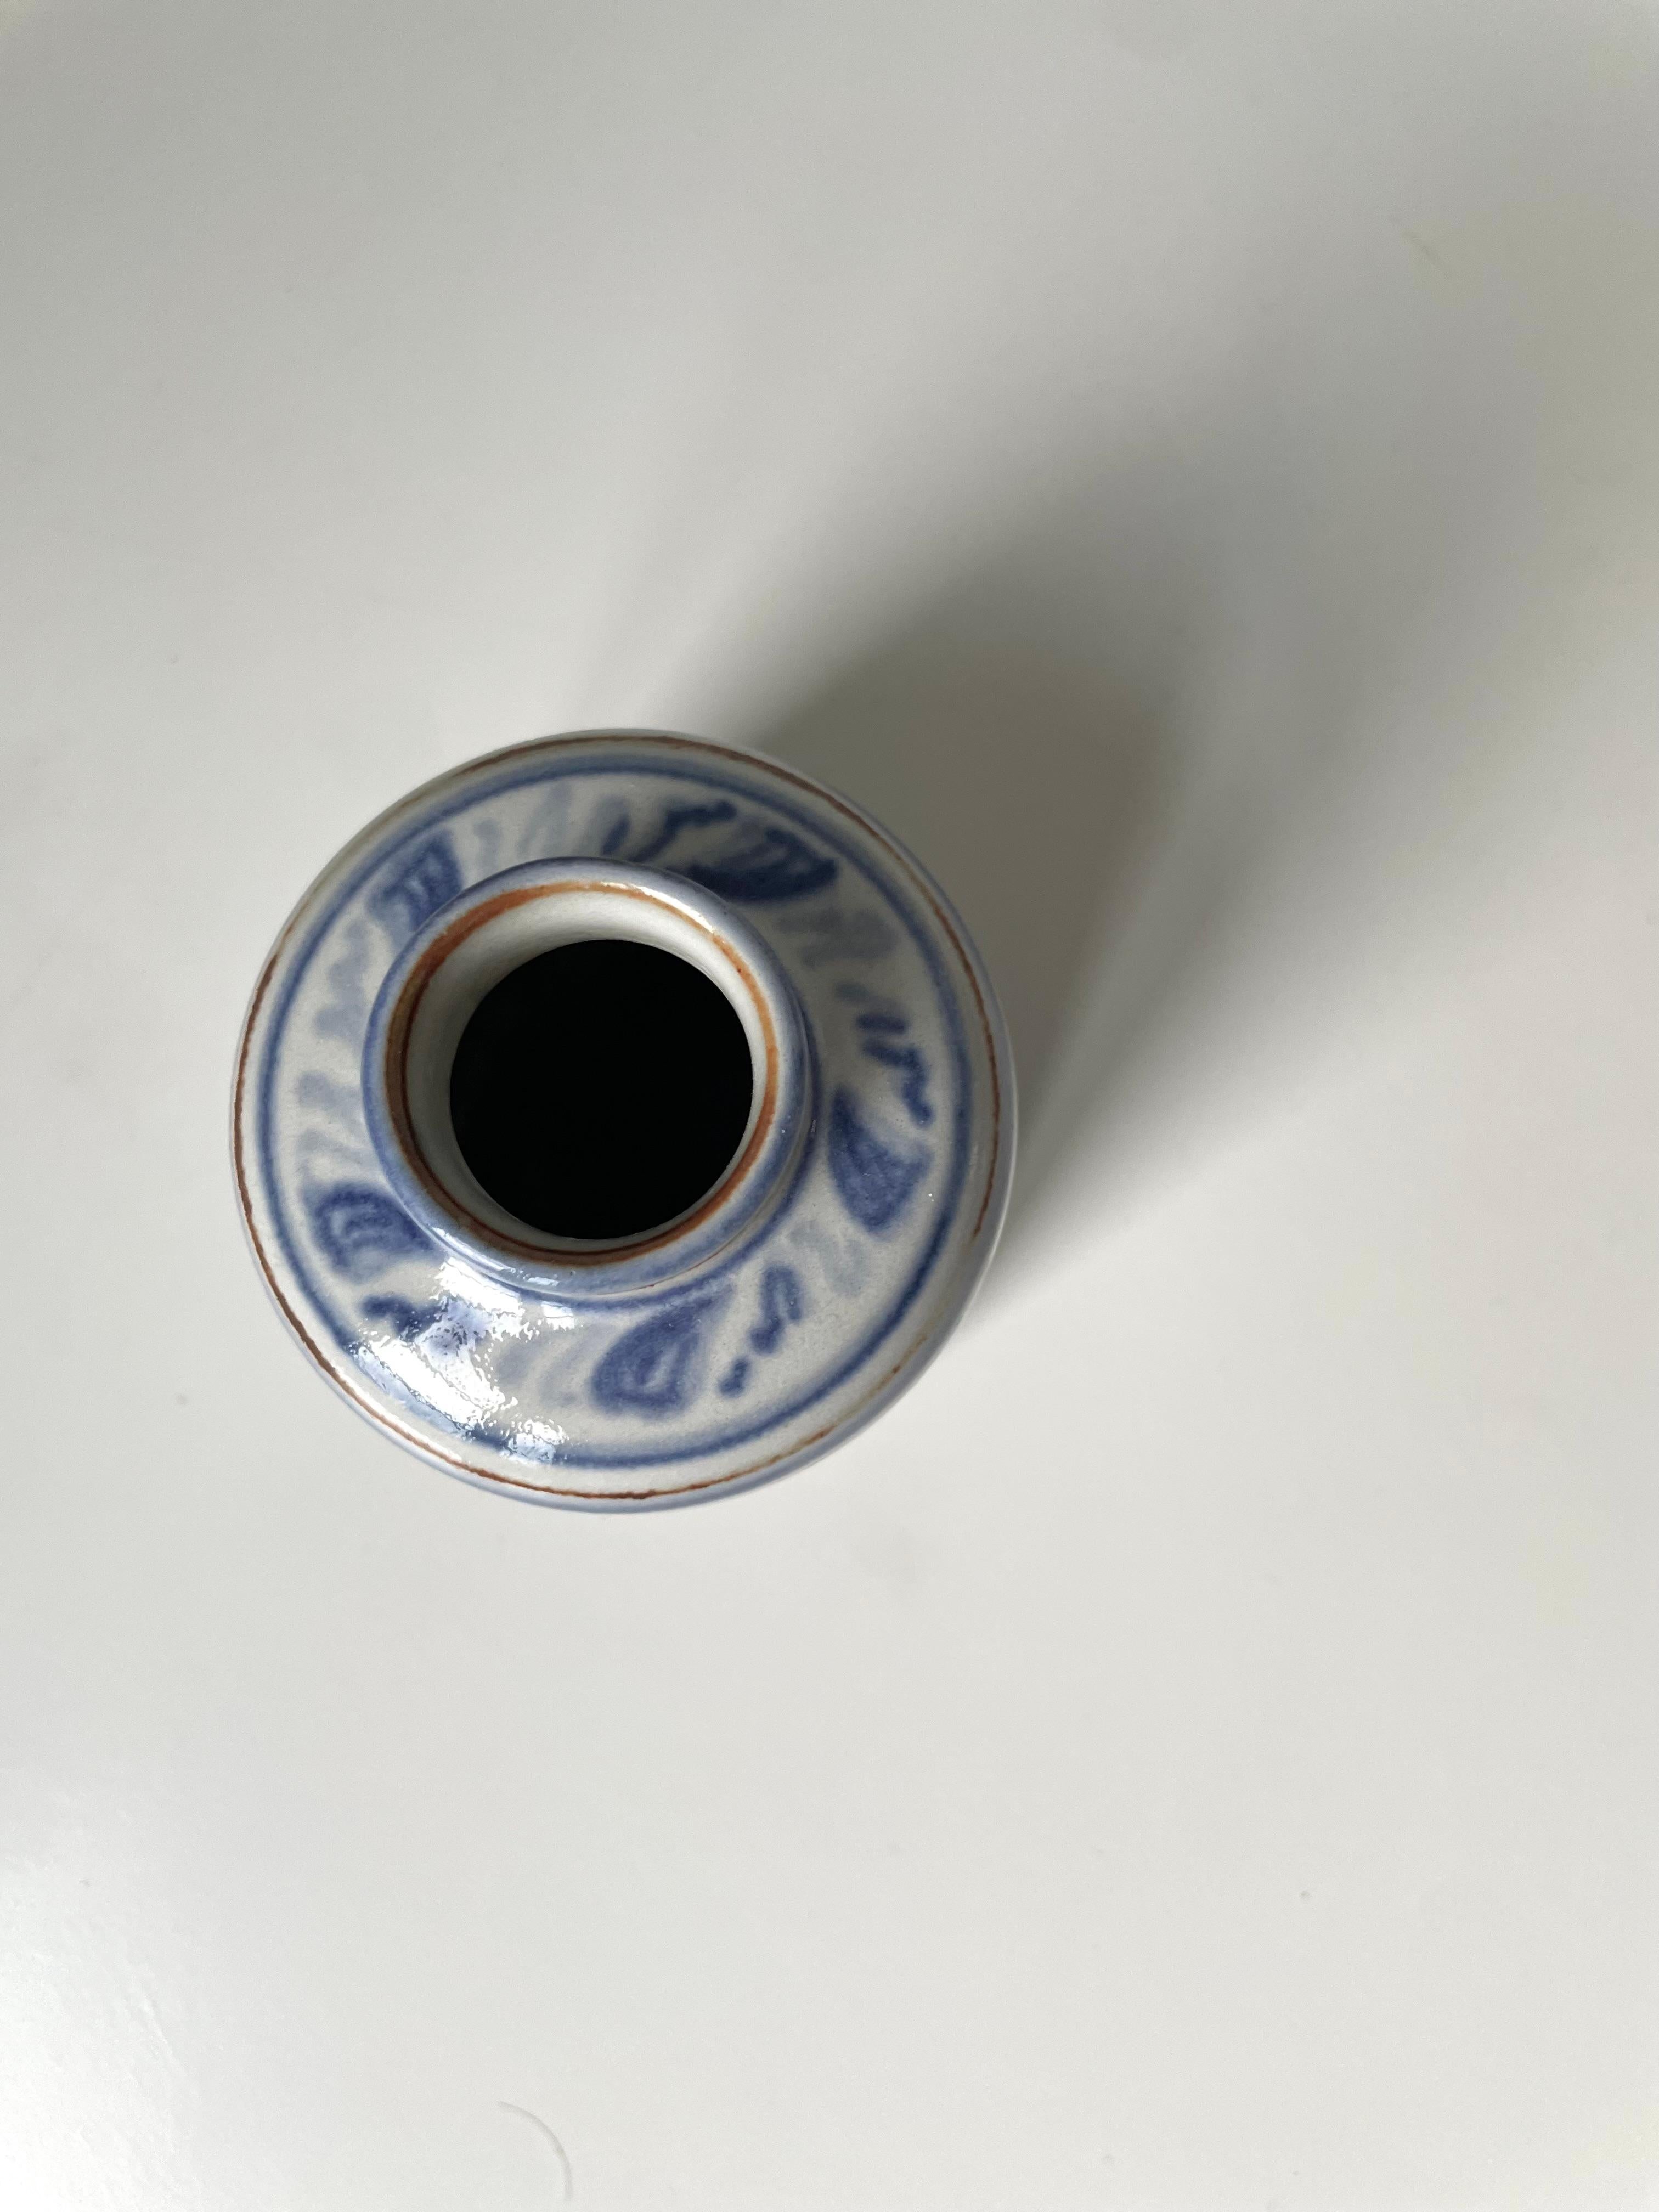 L. Hjorth Hand-Decorated Blue White Vase, 1950s For Sale 3